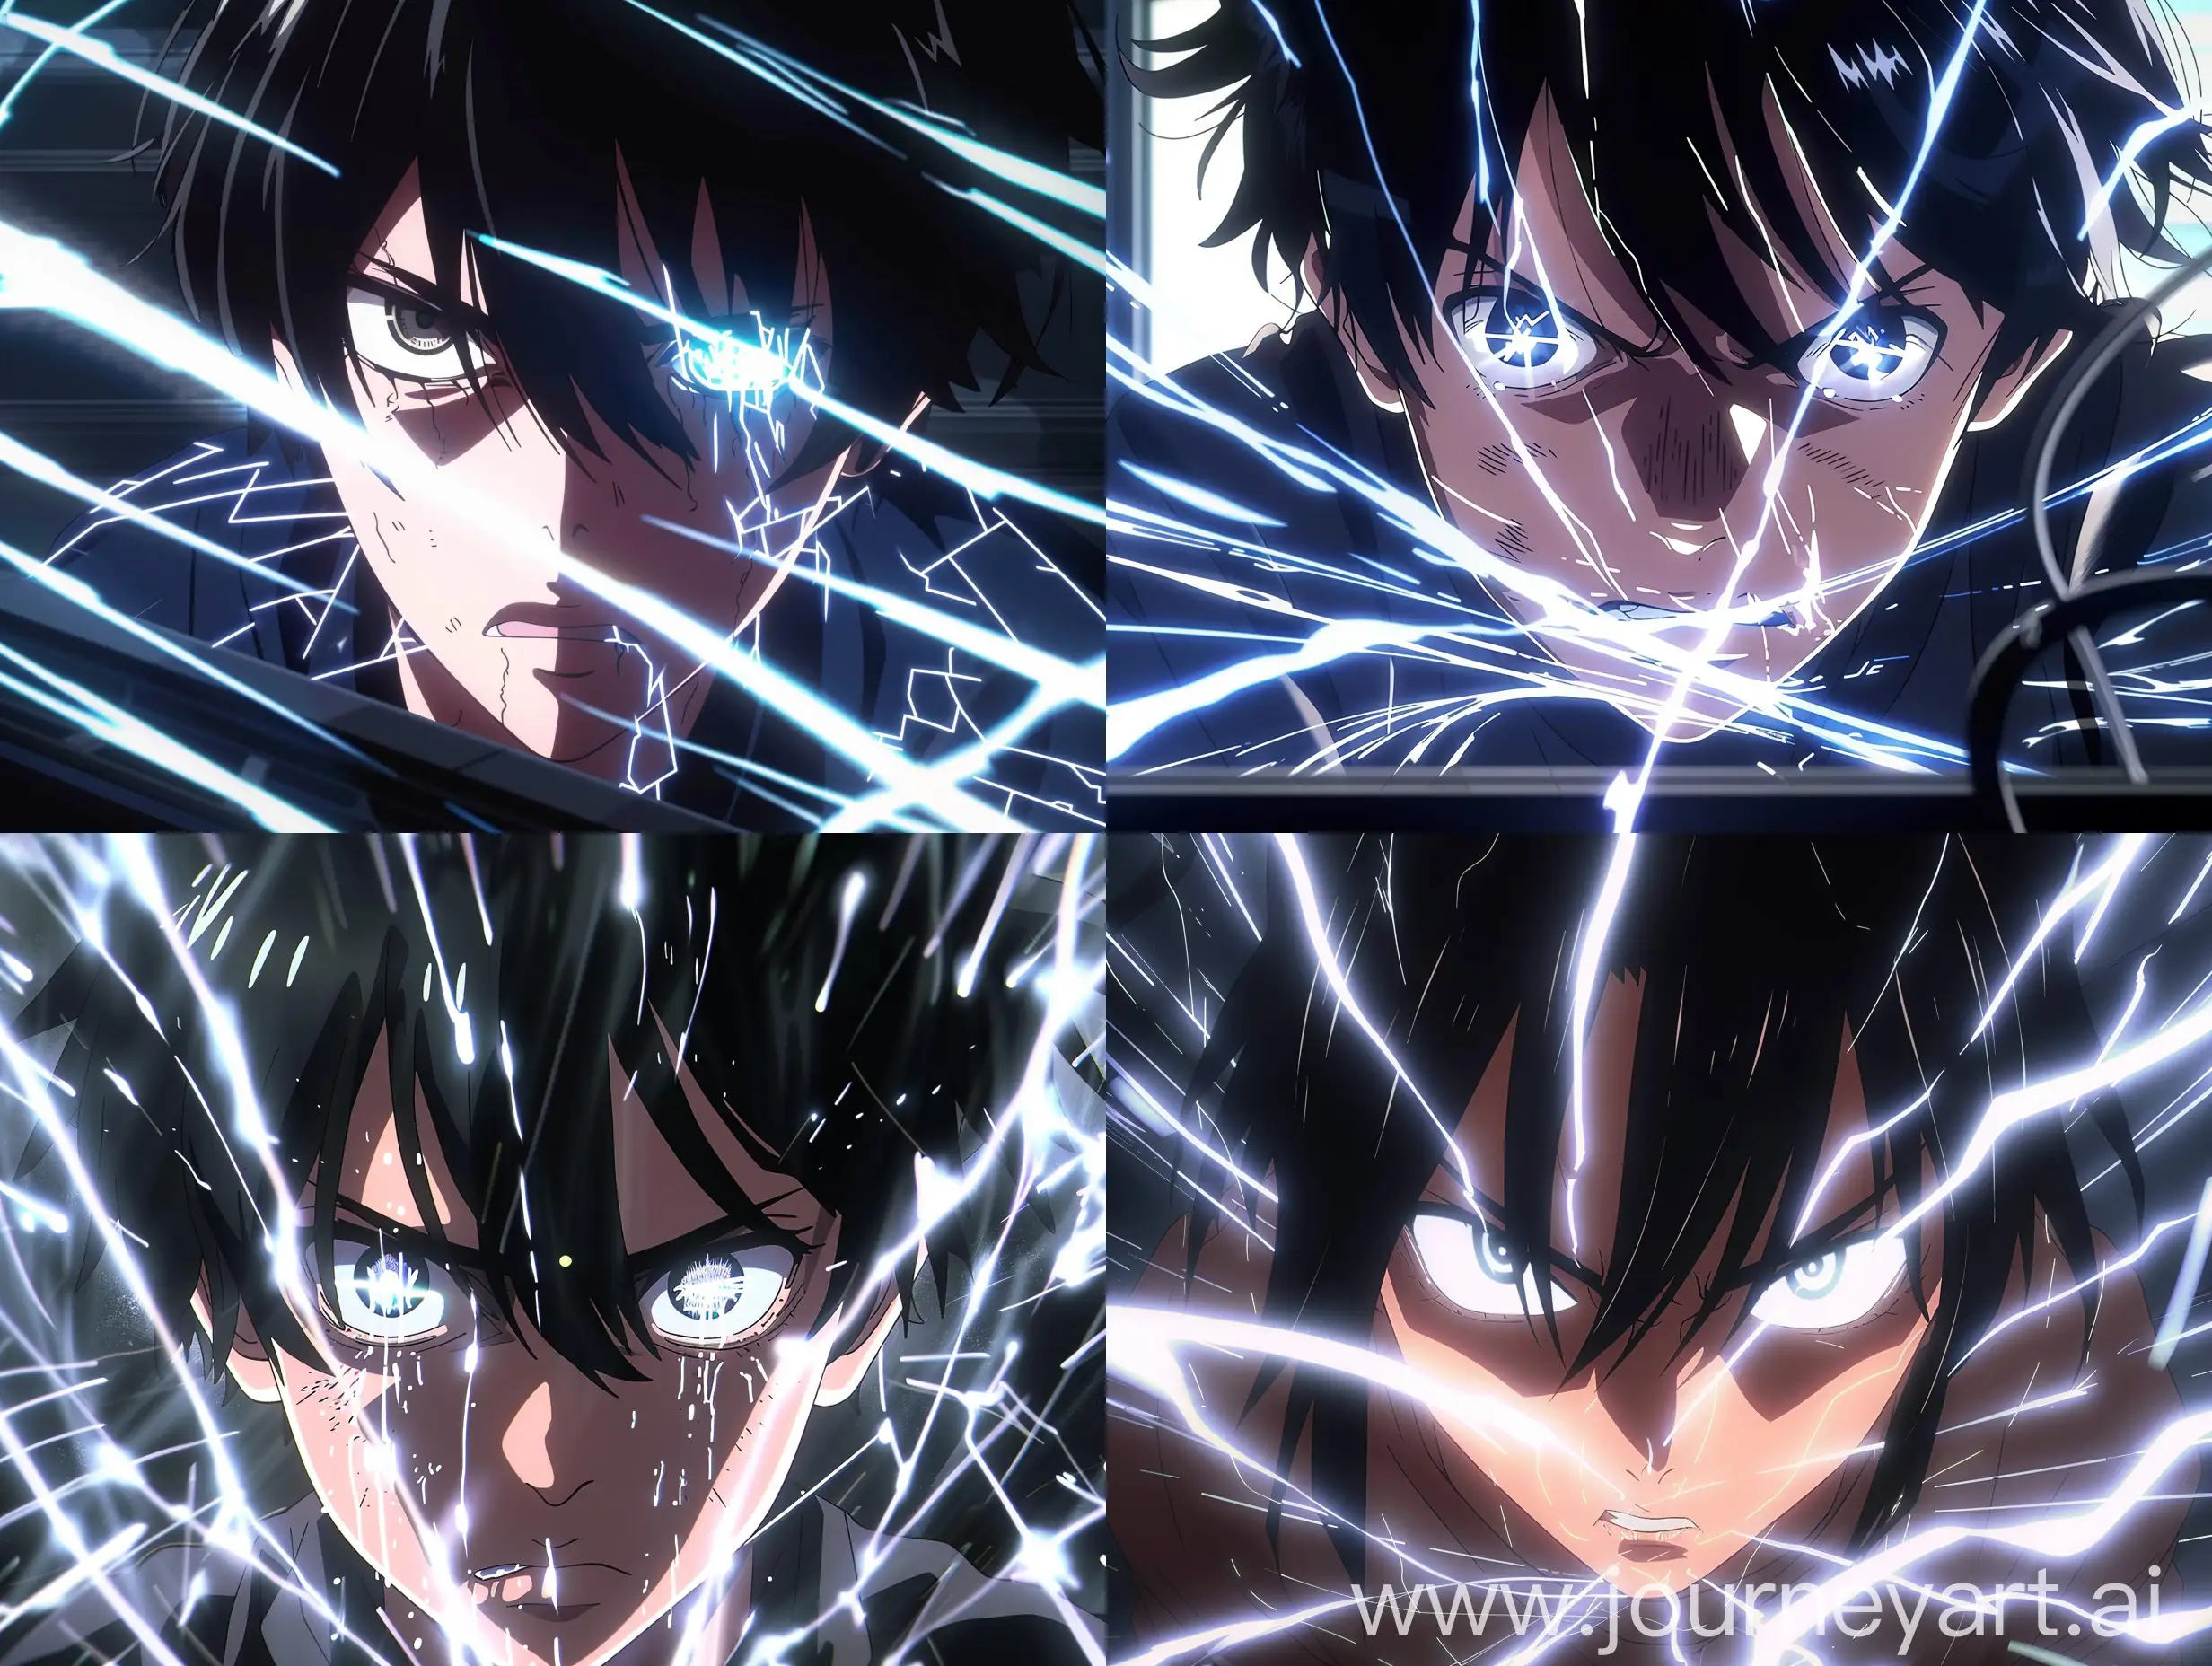 A close-up vertical anime thumbnail of a young man with black hair, intensely focused on a computer screen. His eyes glow brightly, emanating streaks of light that illuminate his face and surroundings. 